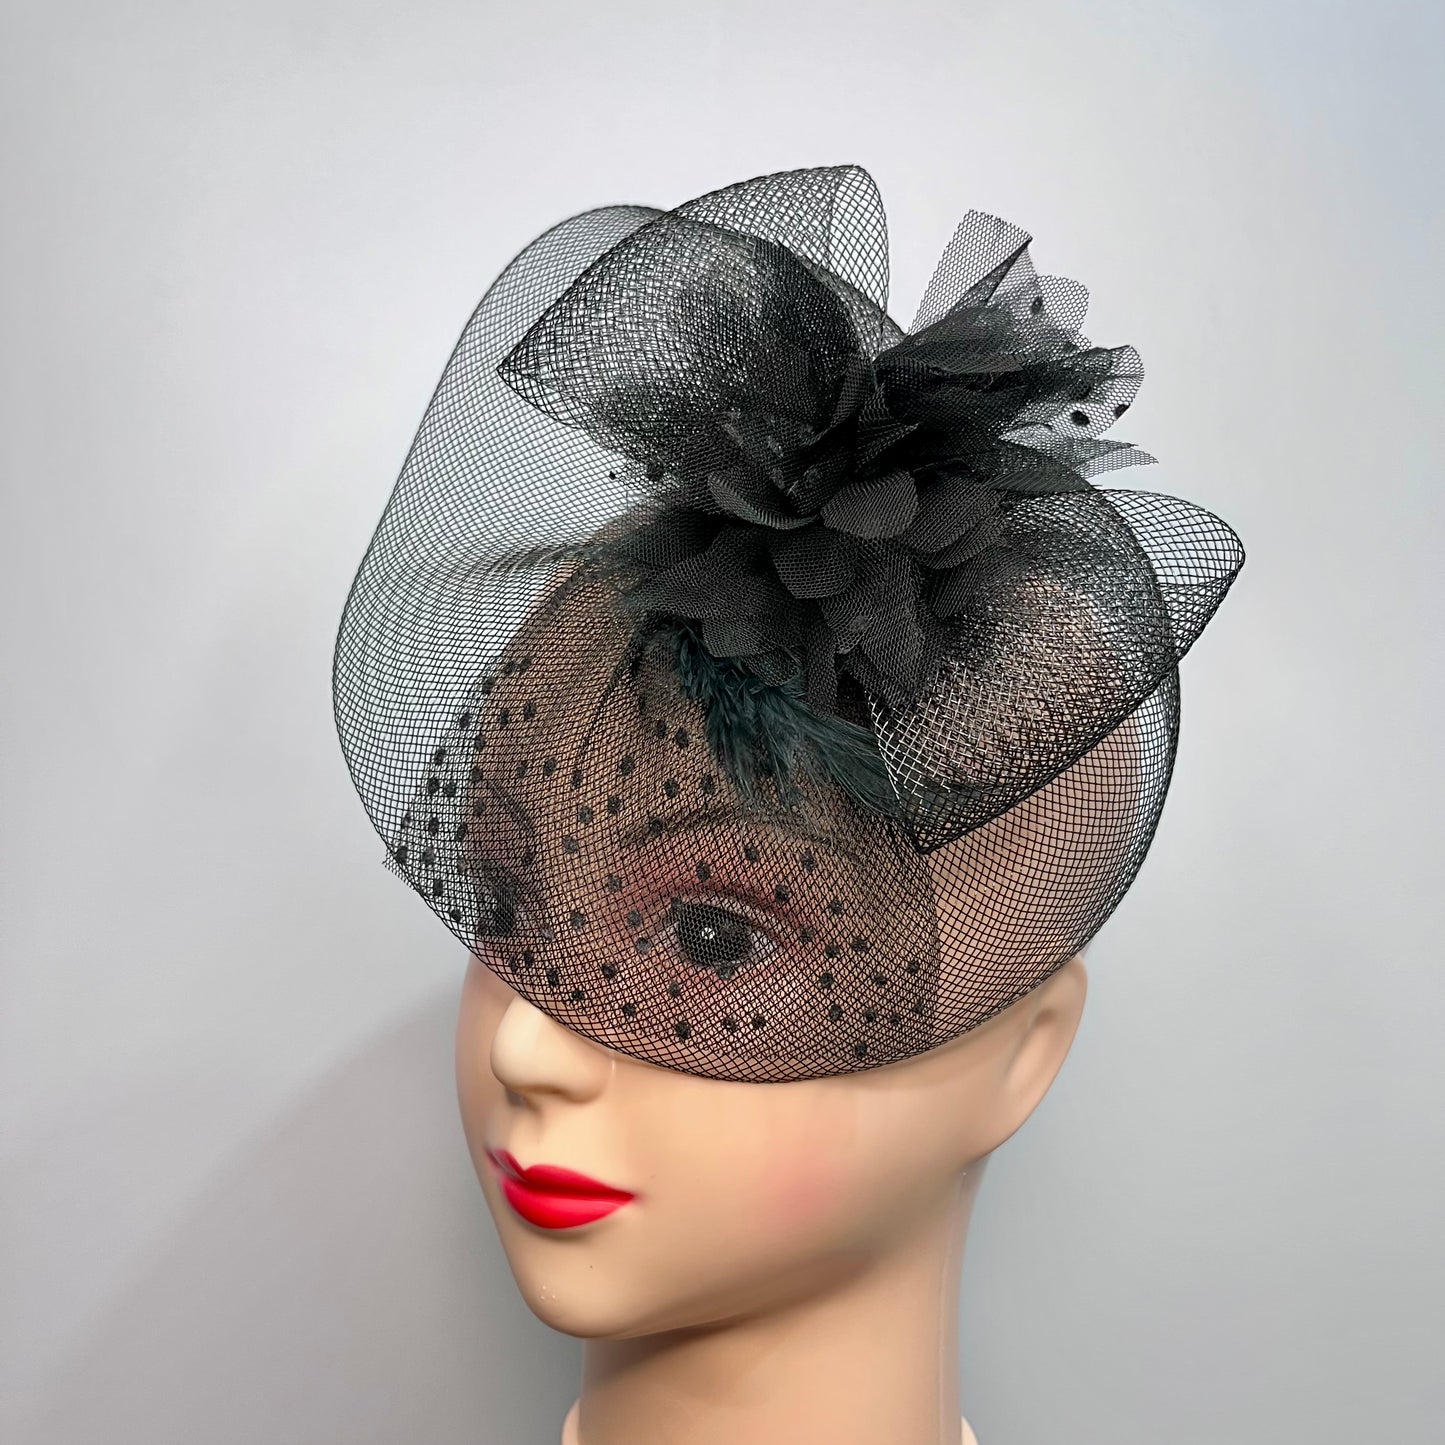 QUEEN OF THE NIGHT Black Fascinator Hat | Women Designer Couture Hair Accessory